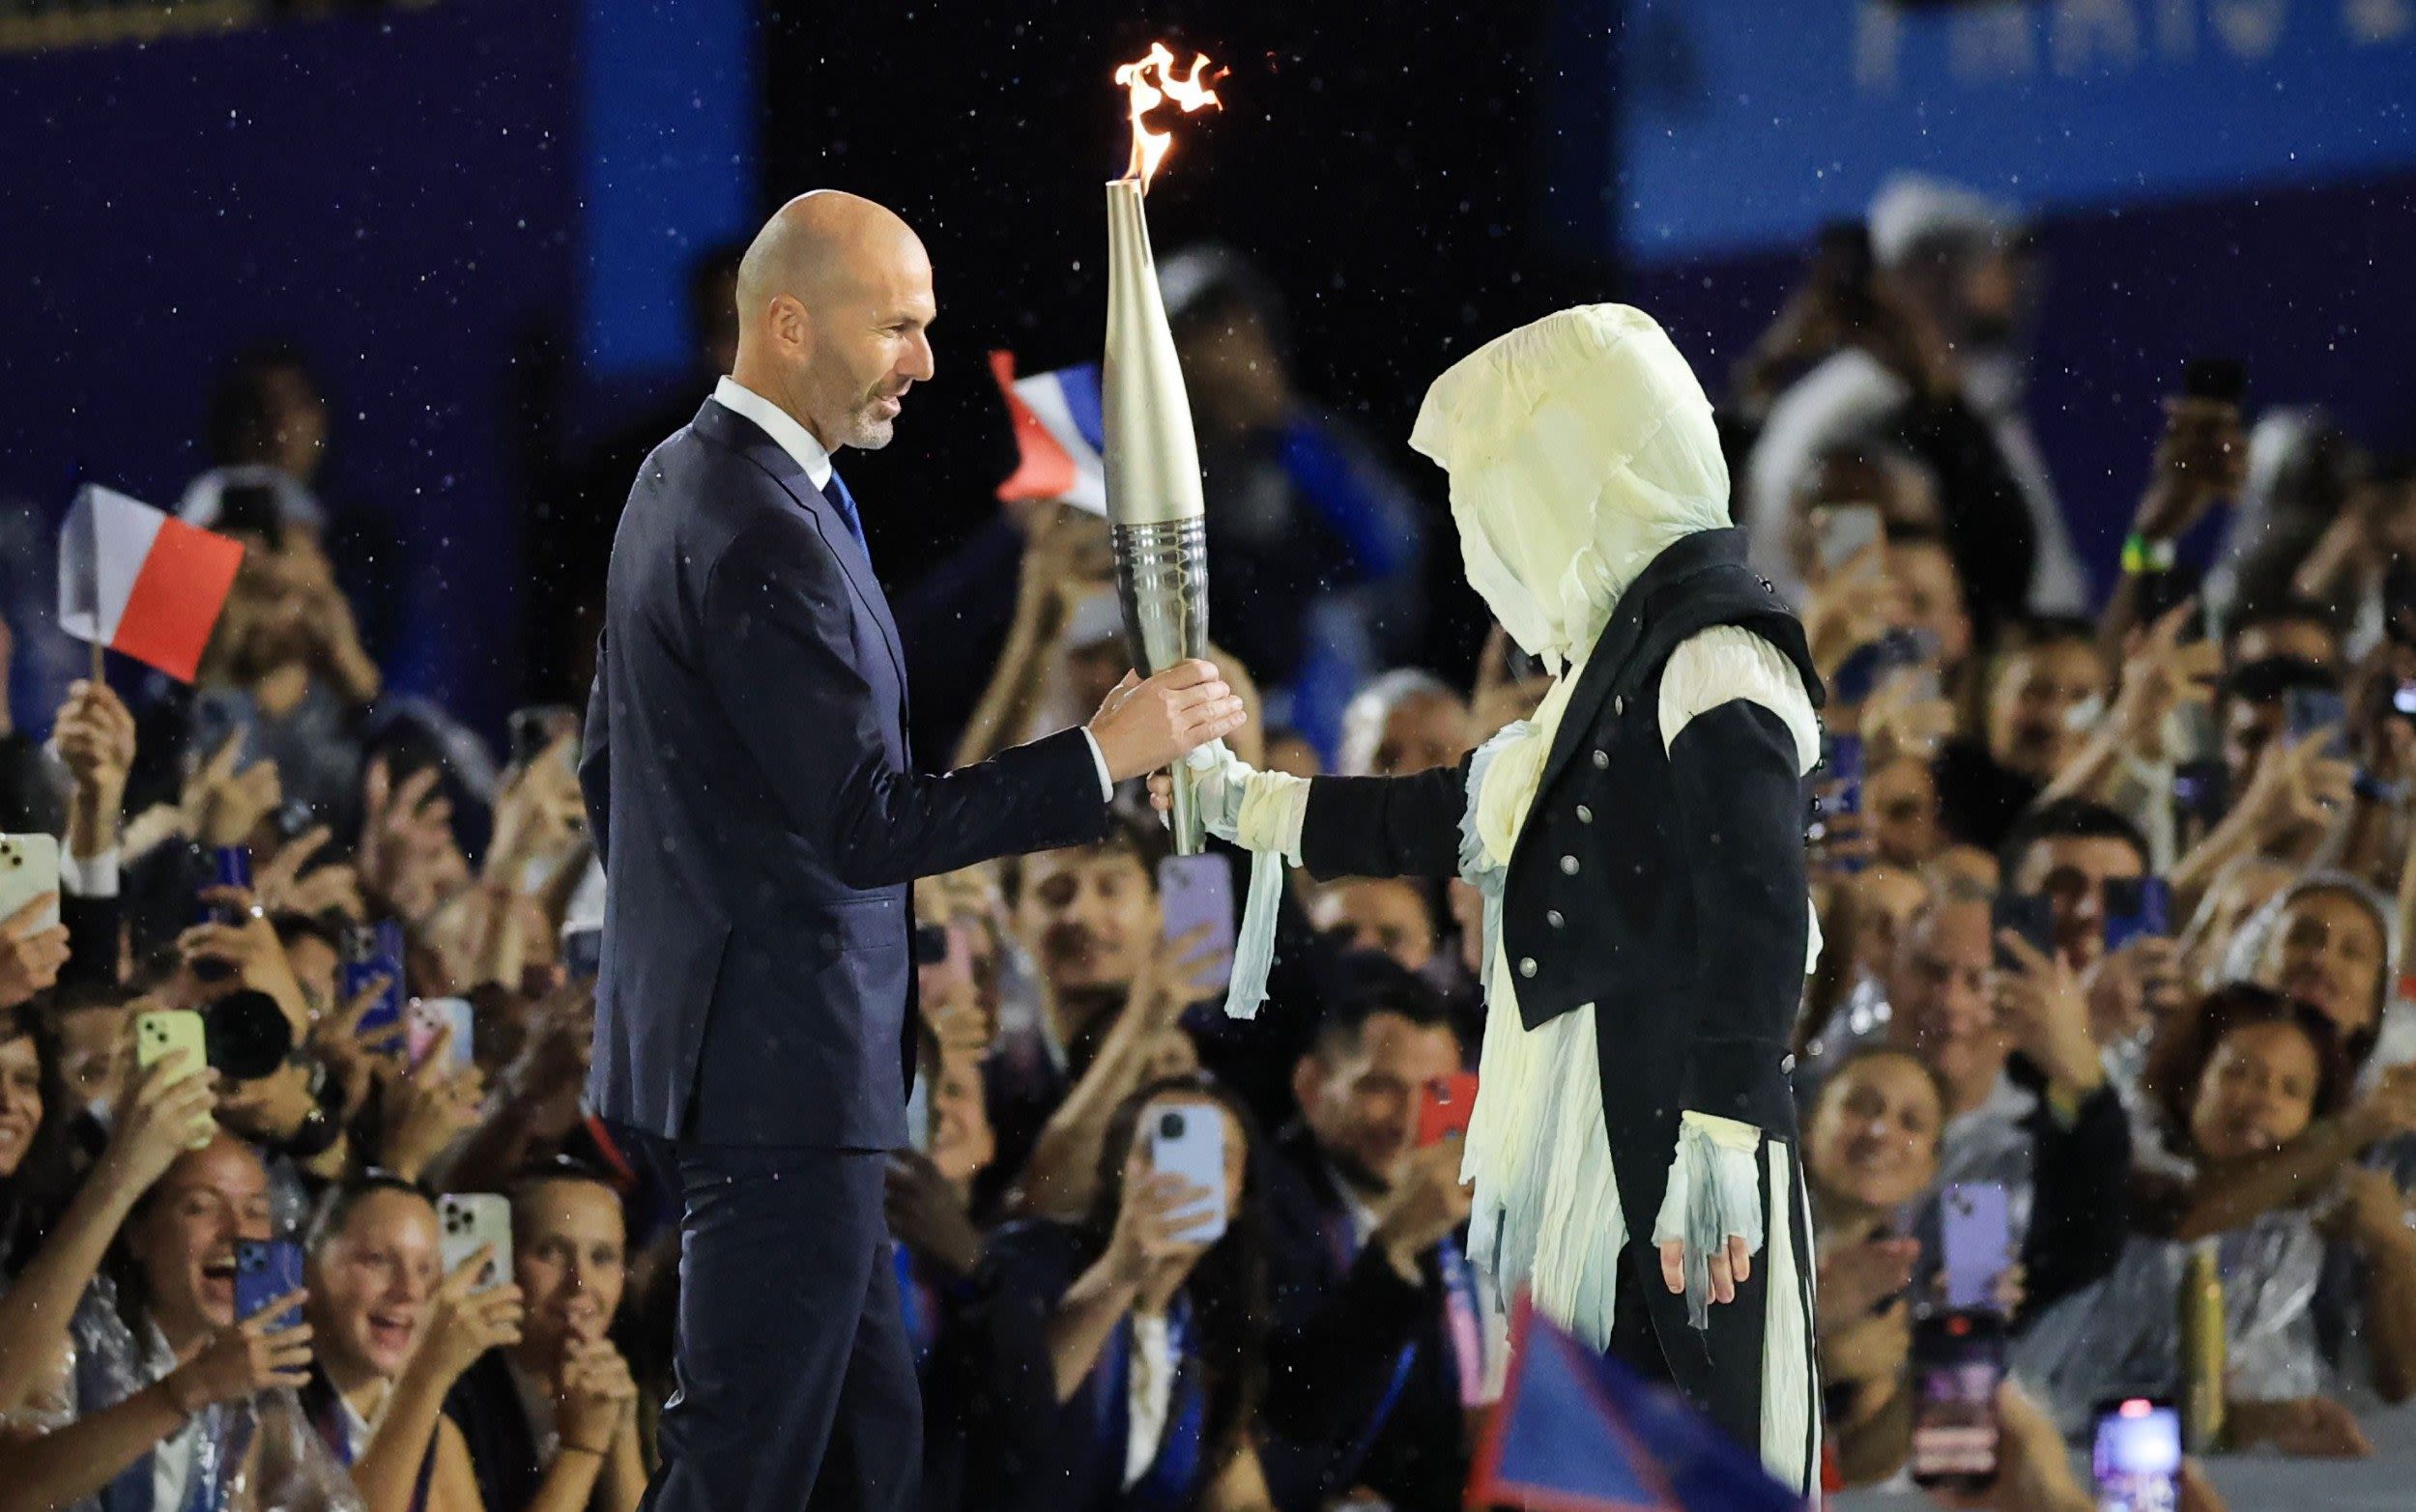 London 2012 v Paris 2024: Why Great Britain still triumphs in battle of the opening ceremonies